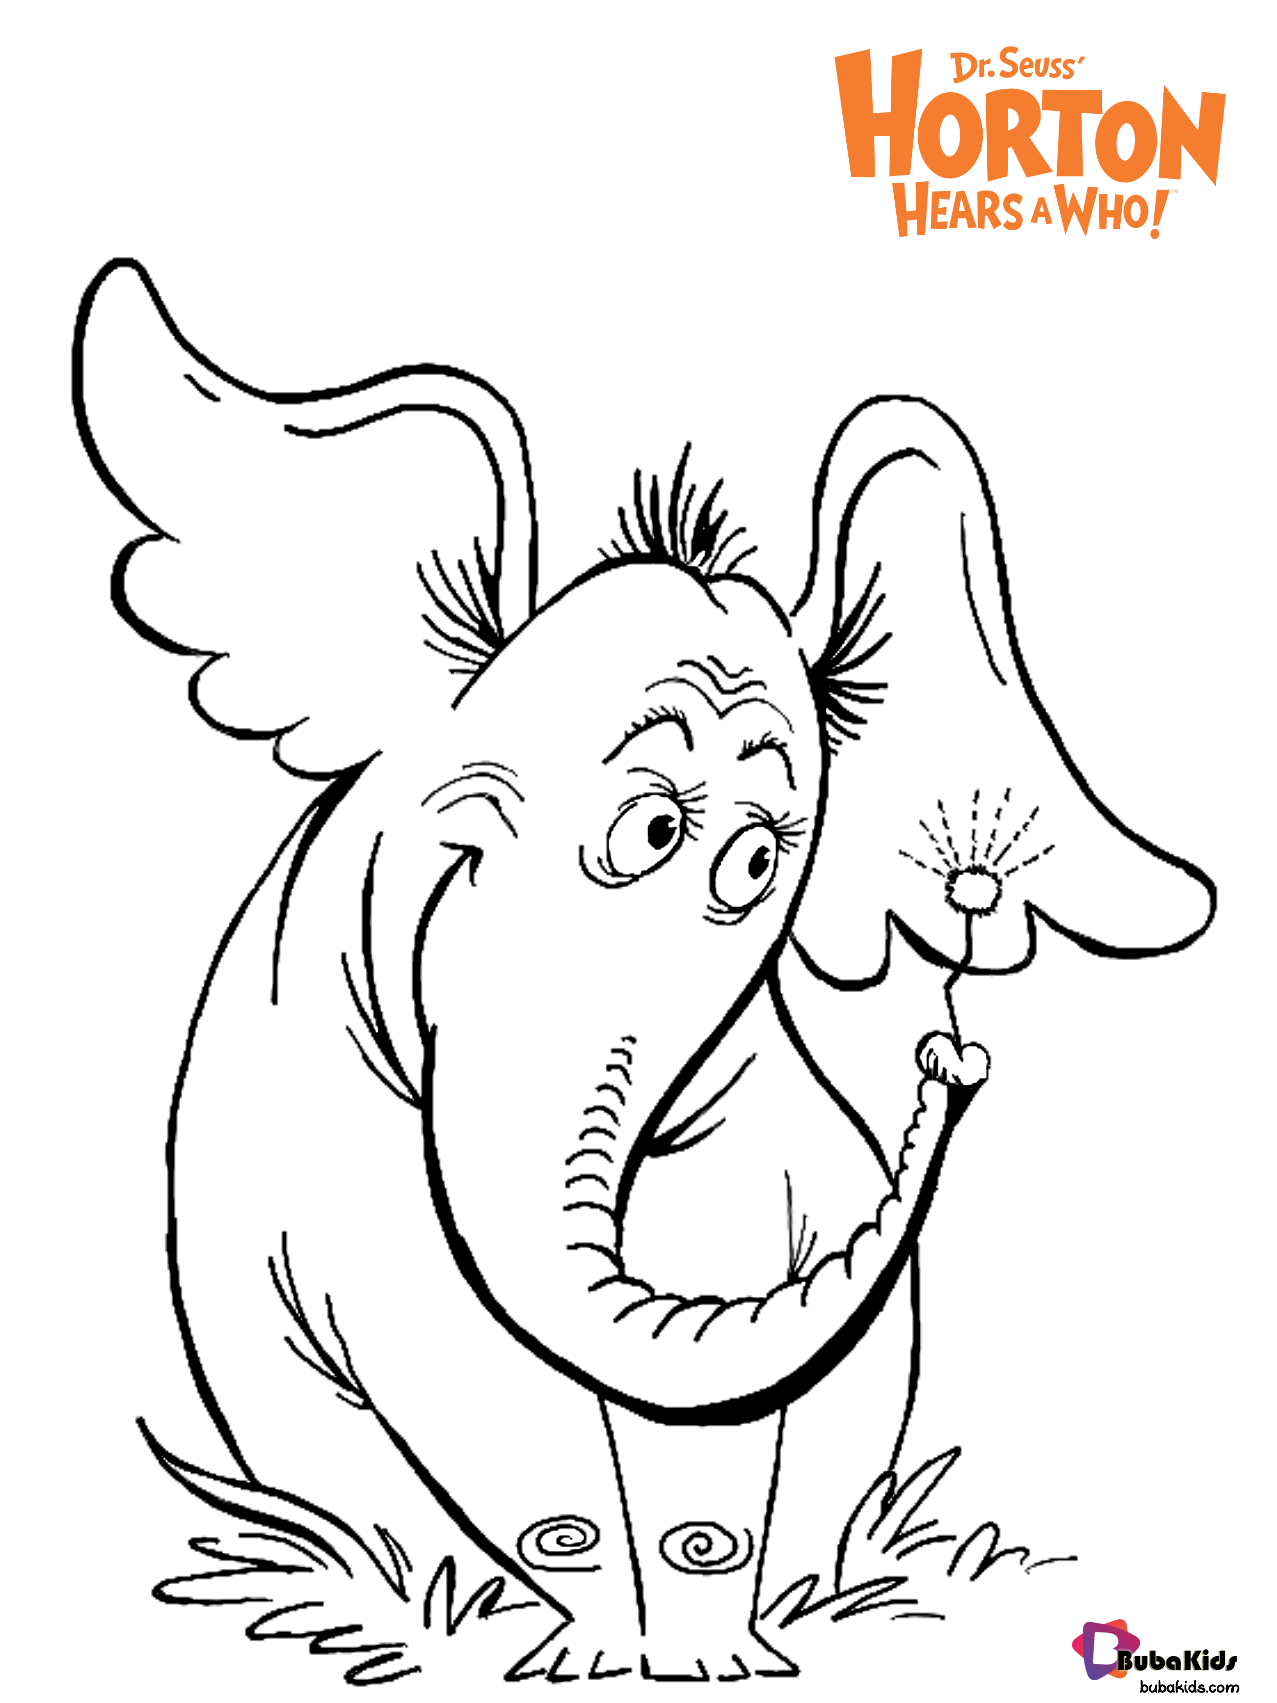 Dr Seuss Horton Hears A Who Free Download Coloring Pages For Kids BubaKids Animal Coloring Pages Coloring Pages Dr Seuss Coloring Pages